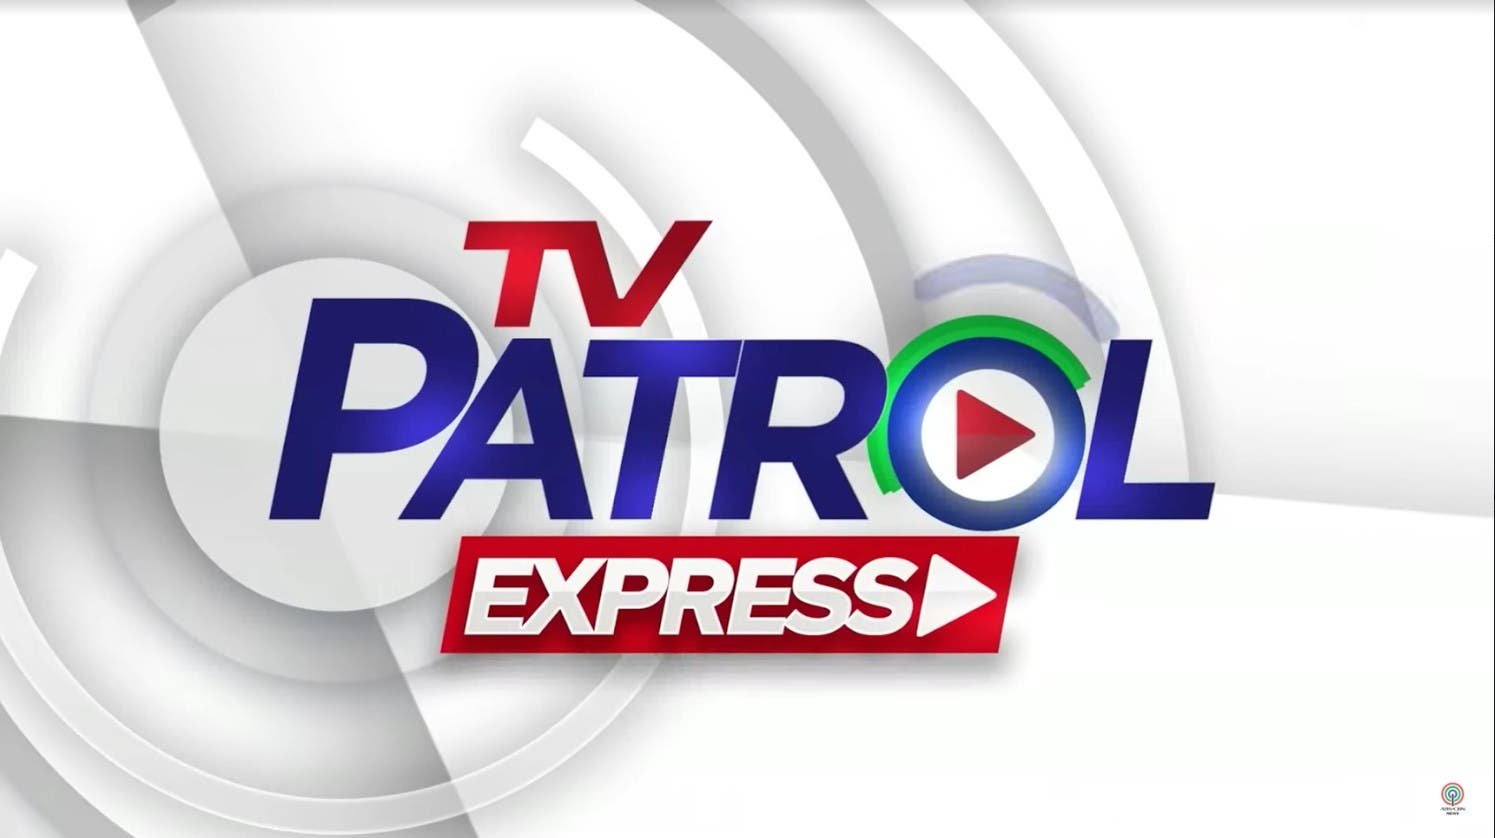 ABS CBN News Launches Digital Exclusive TV Patrol Express on Facebook and Youtube